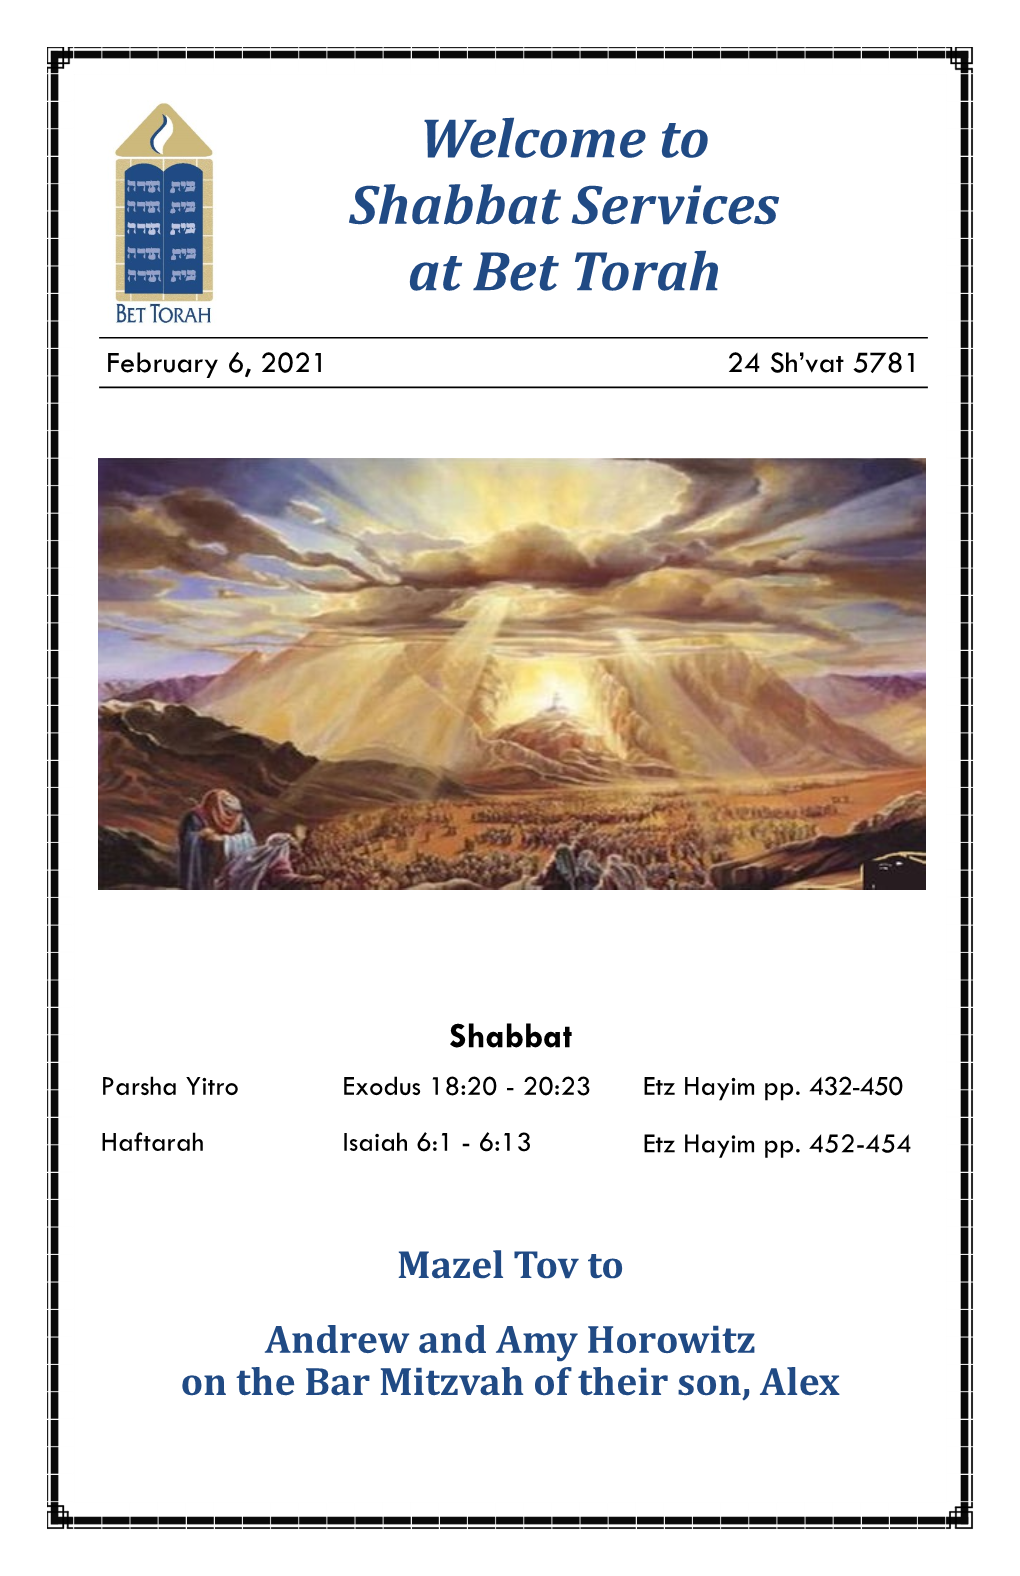 Welcome to Shabbat Services at Bet Torah